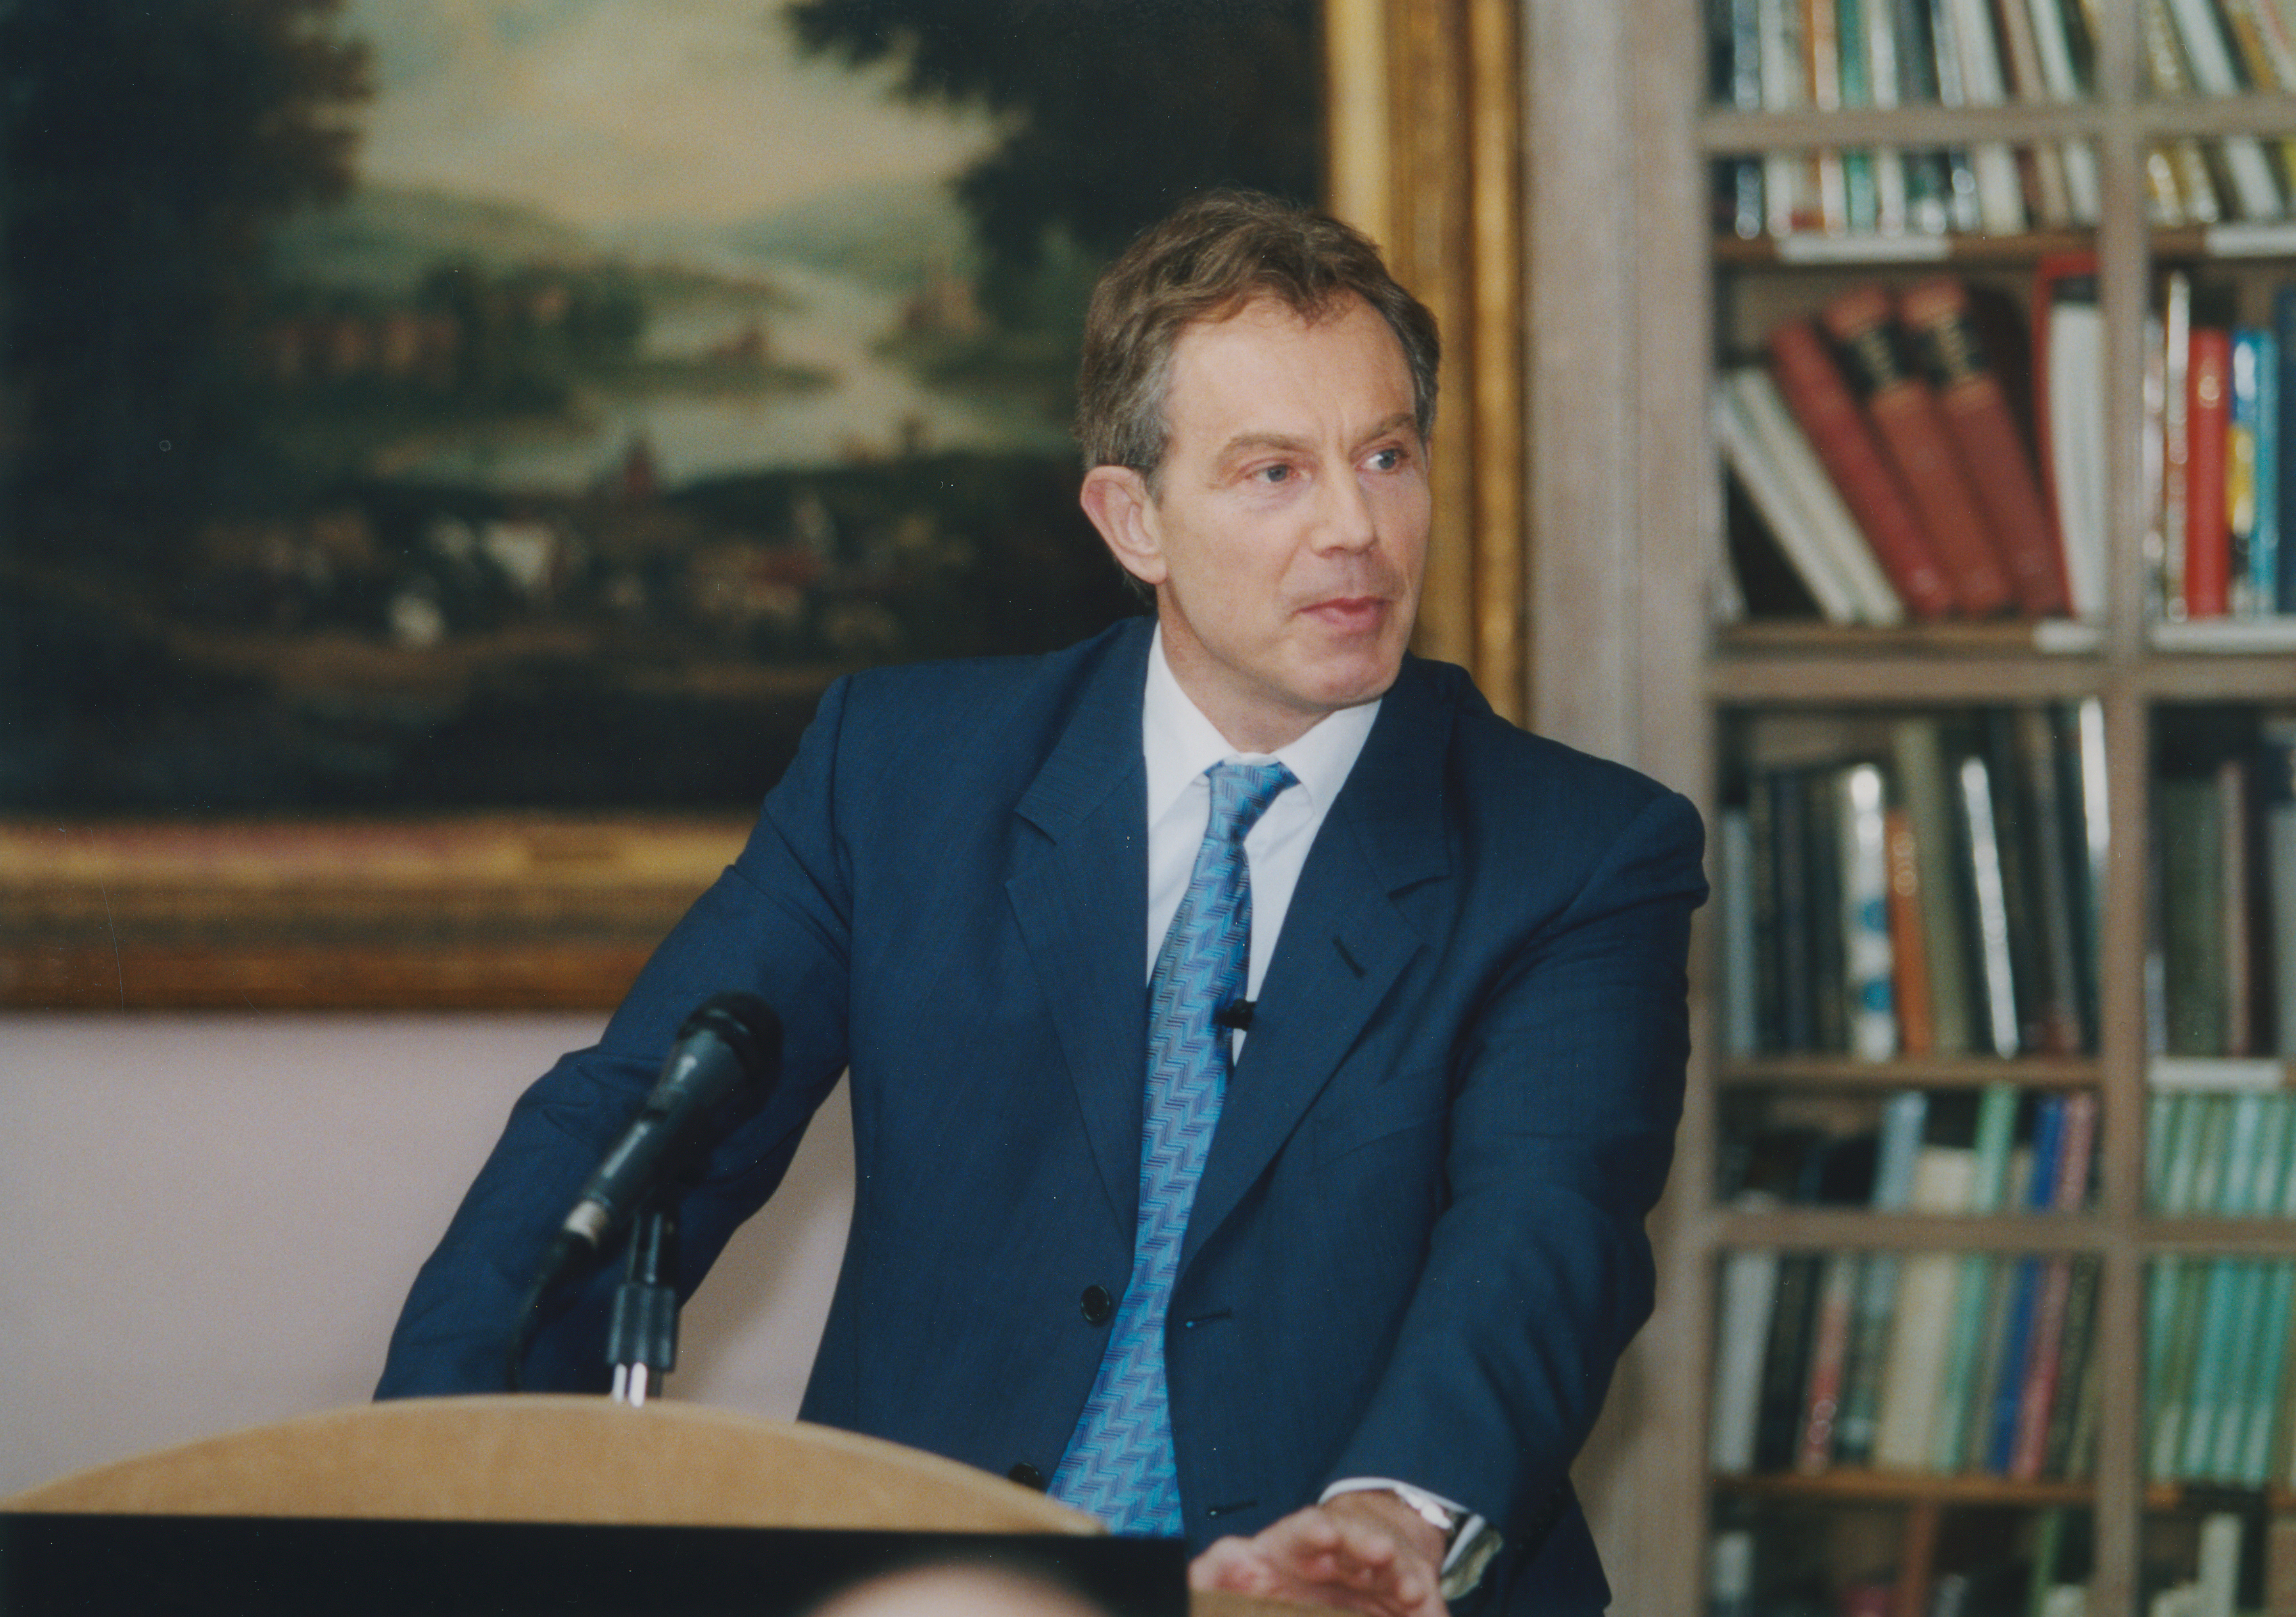 Former UK prime minister speaking on "The Next Steps for New Labour" at LSE, 12 March 2002